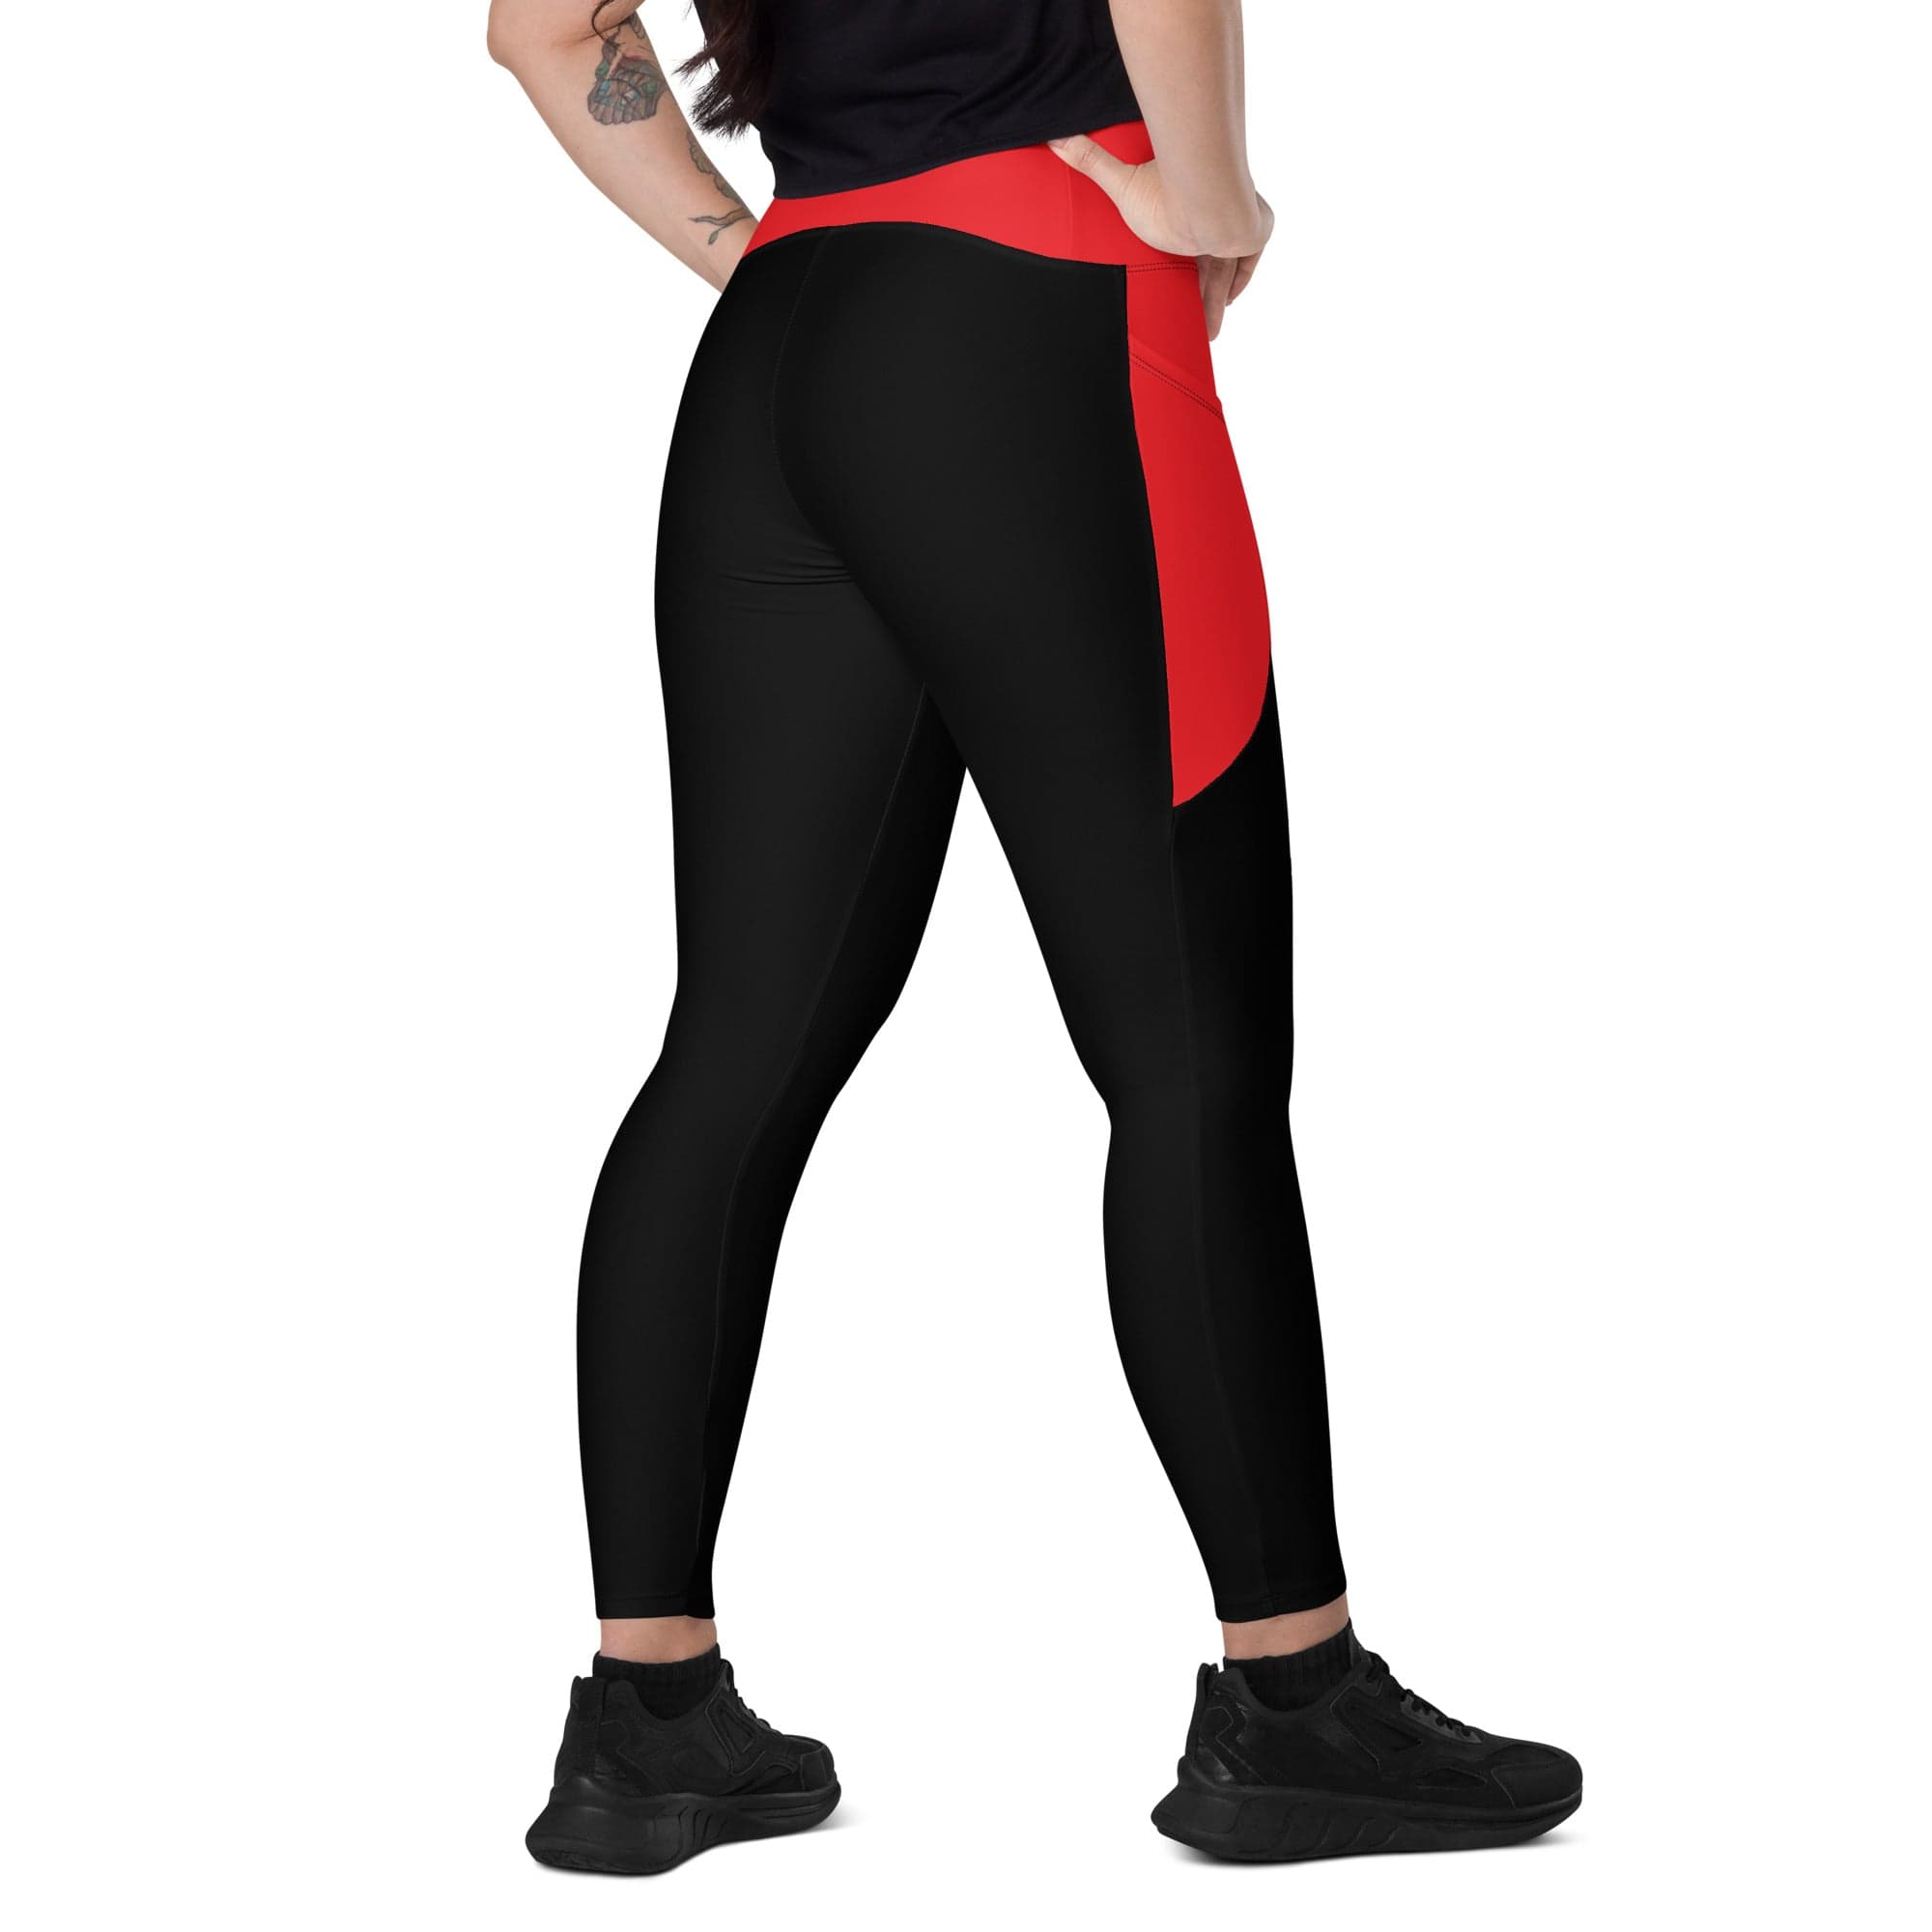 Fire Cornhole Crossover leggings with pockets in black and red